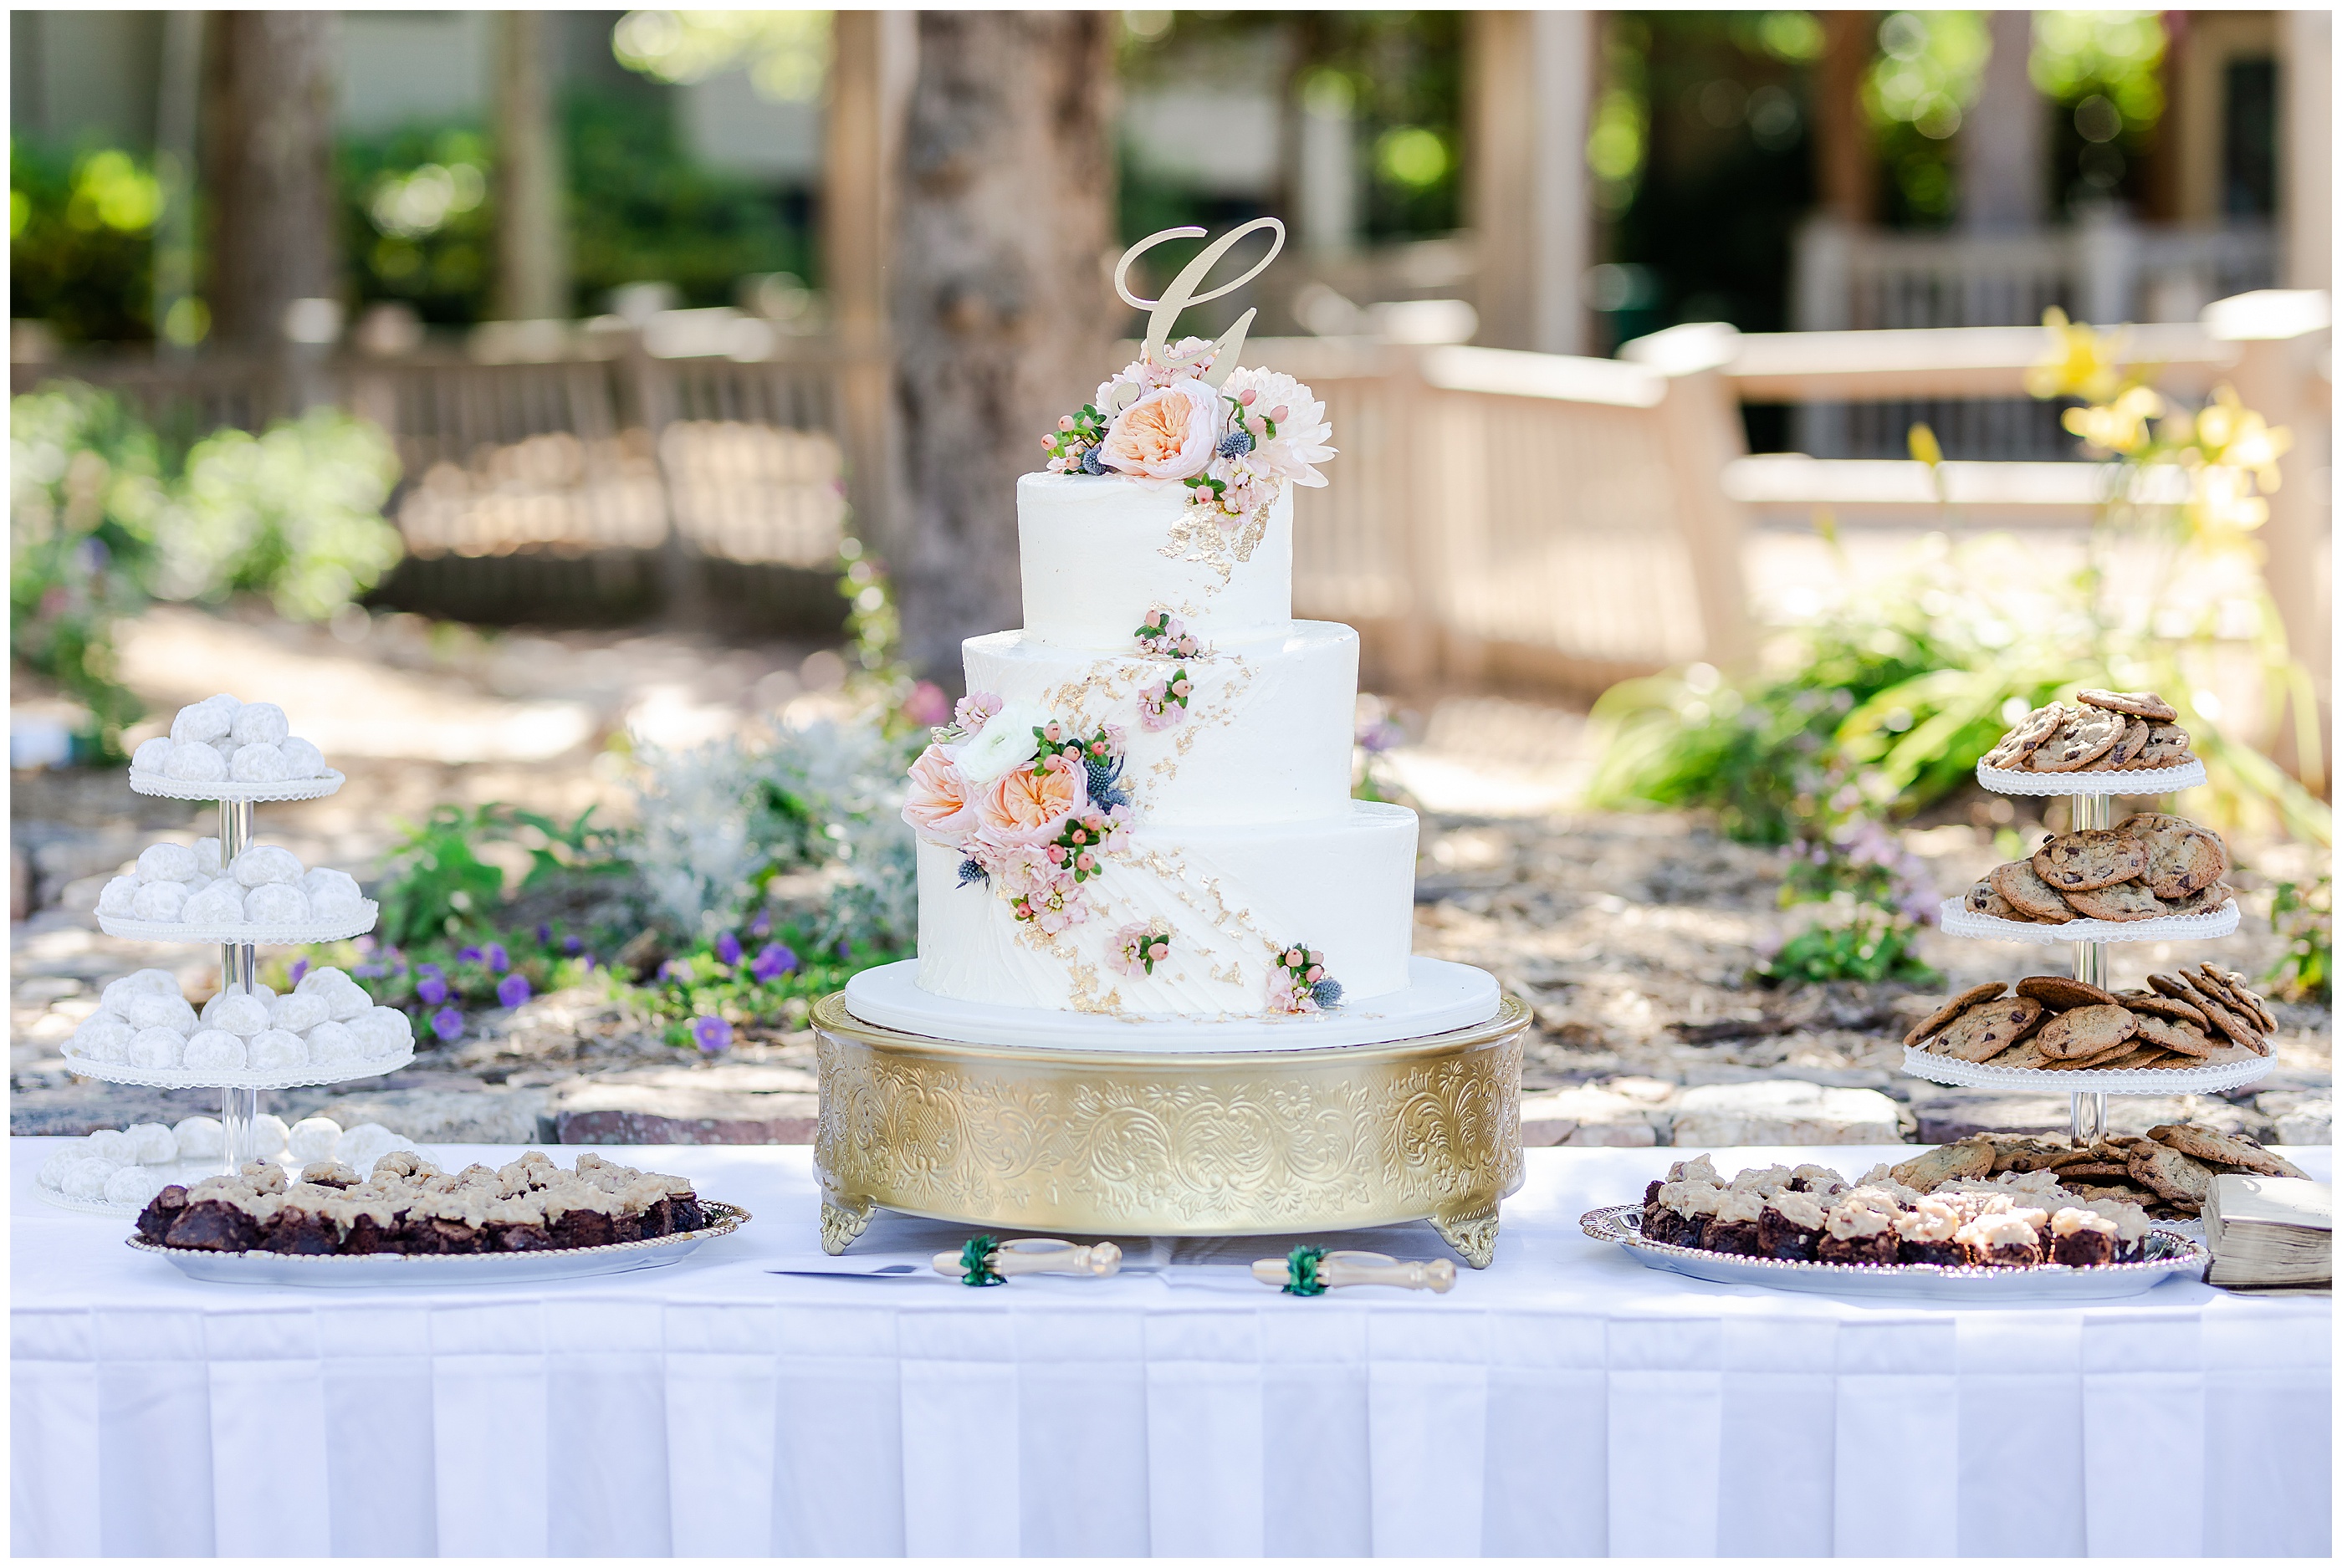 Cake by Pardox Pastry at Wintergreen Resort Luke and Ashley Photography